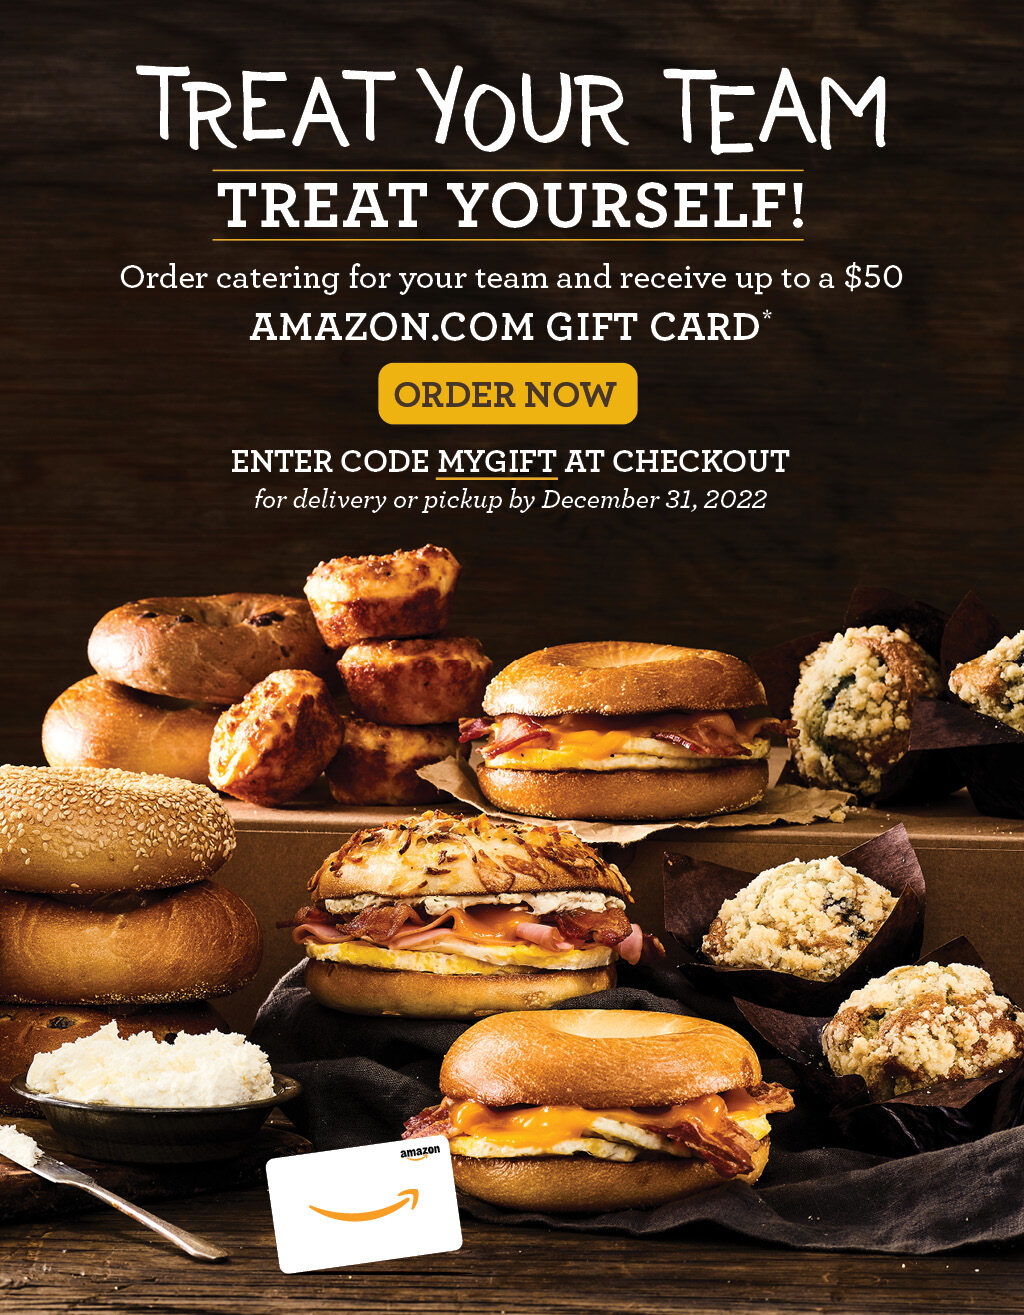 Treat your team, treat yourself – get an Amazon gift card when you order Einstein Bros. Bagels catering